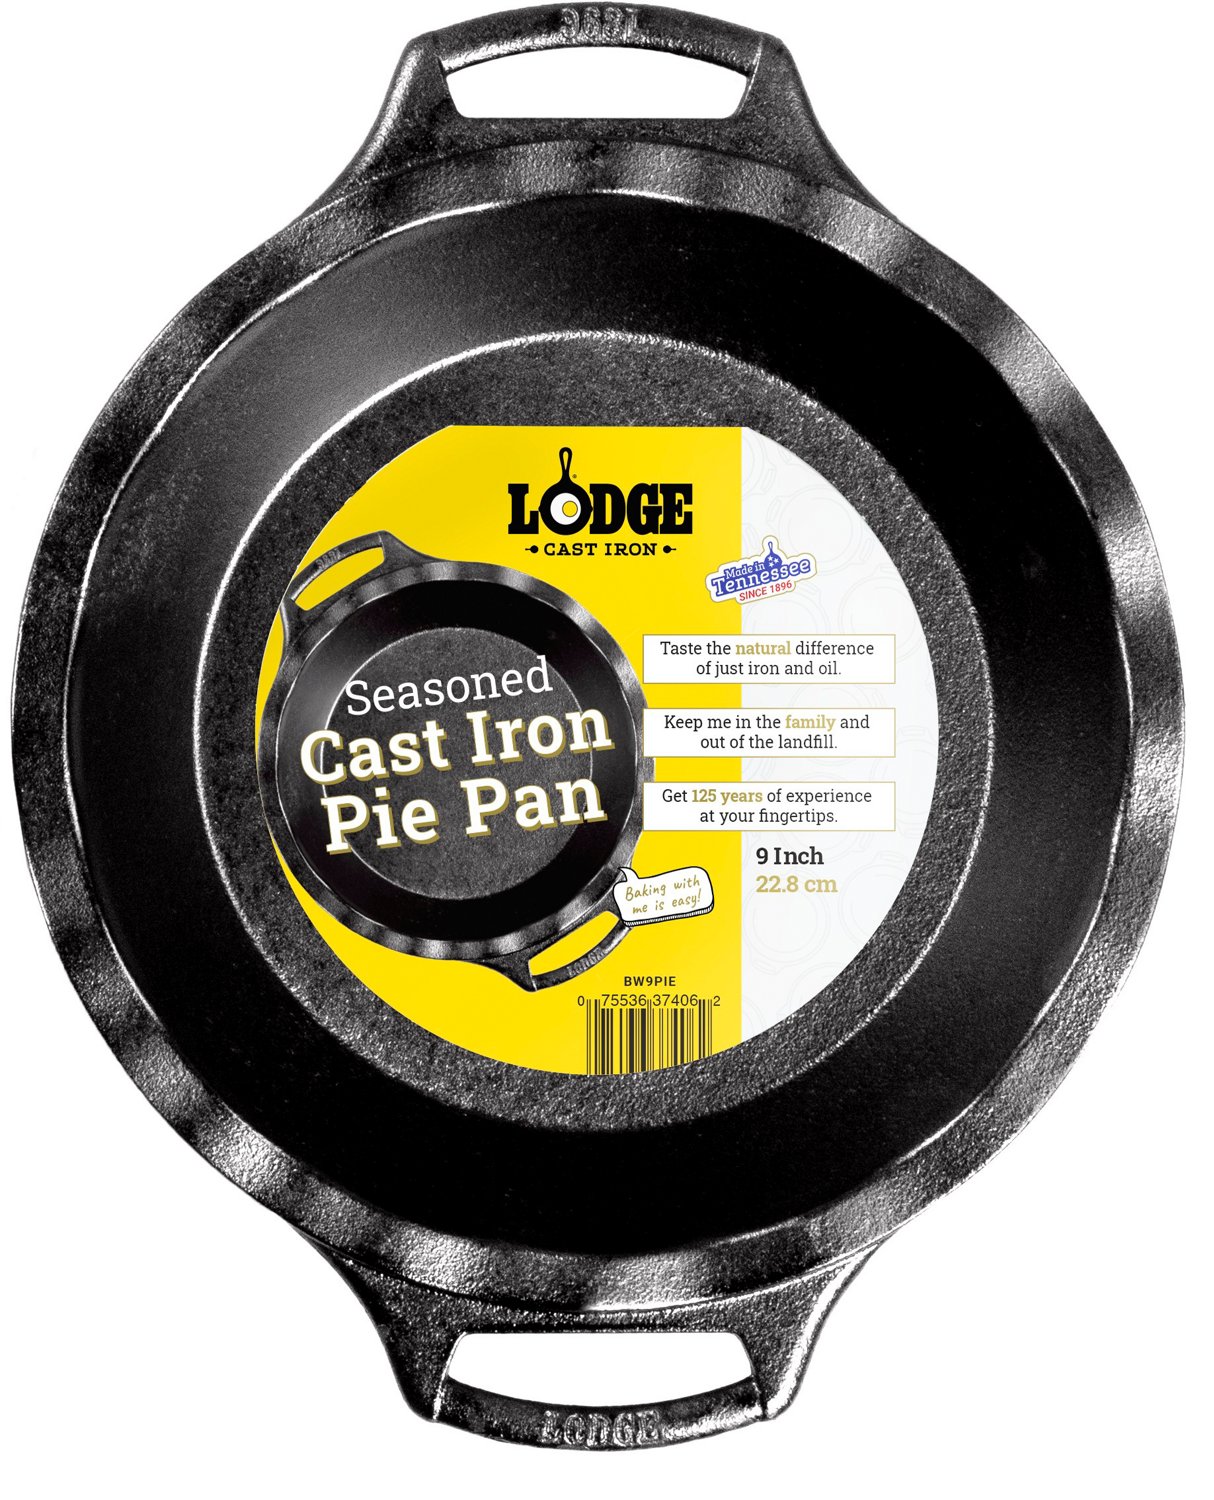 Pie Pan - Pre-Seasoned Cast Iron 12 x 9.5 x 2 Inches By Old Mountain